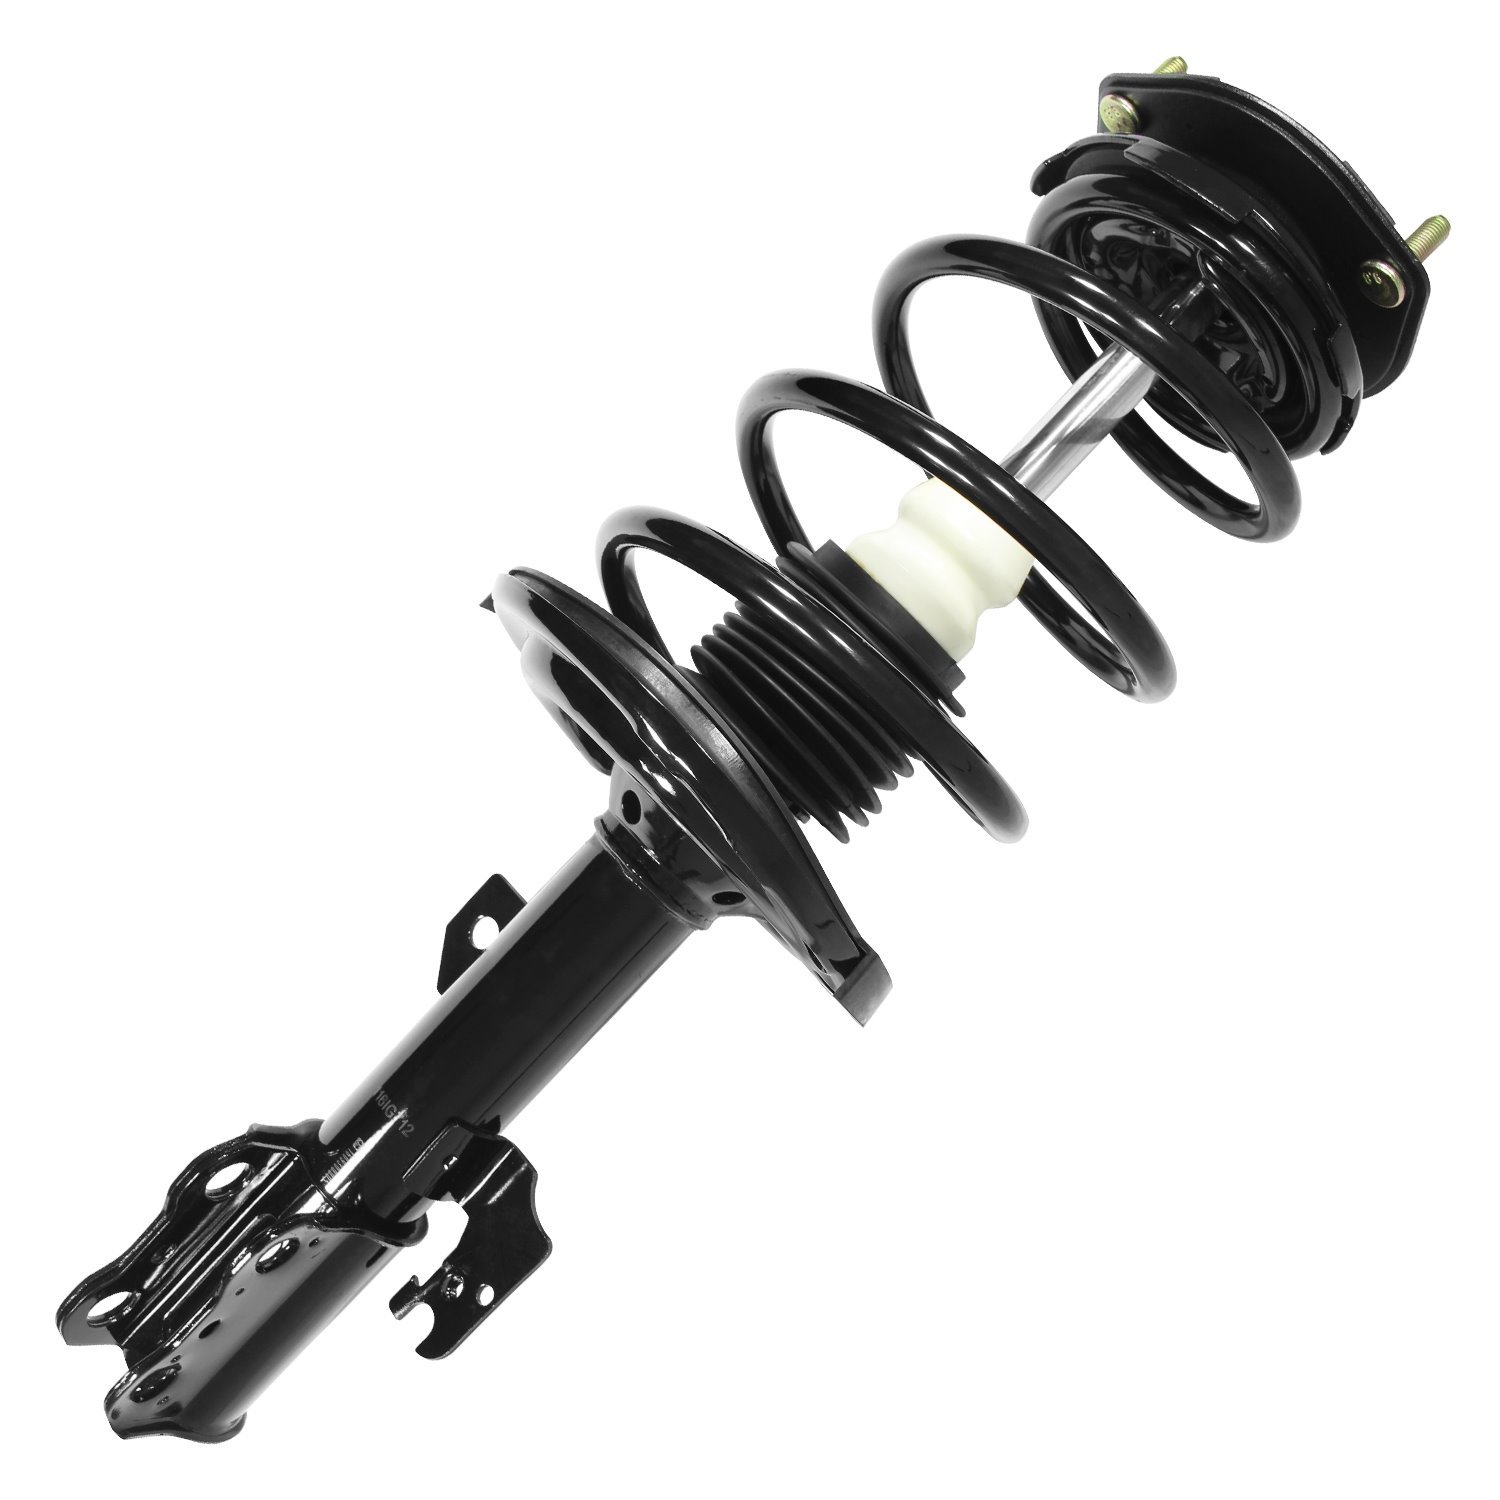 11712 Suspension Strut & Coil Spring Assembly Fits Select Lexus ES330, Toyota Camry, Toyota Solara